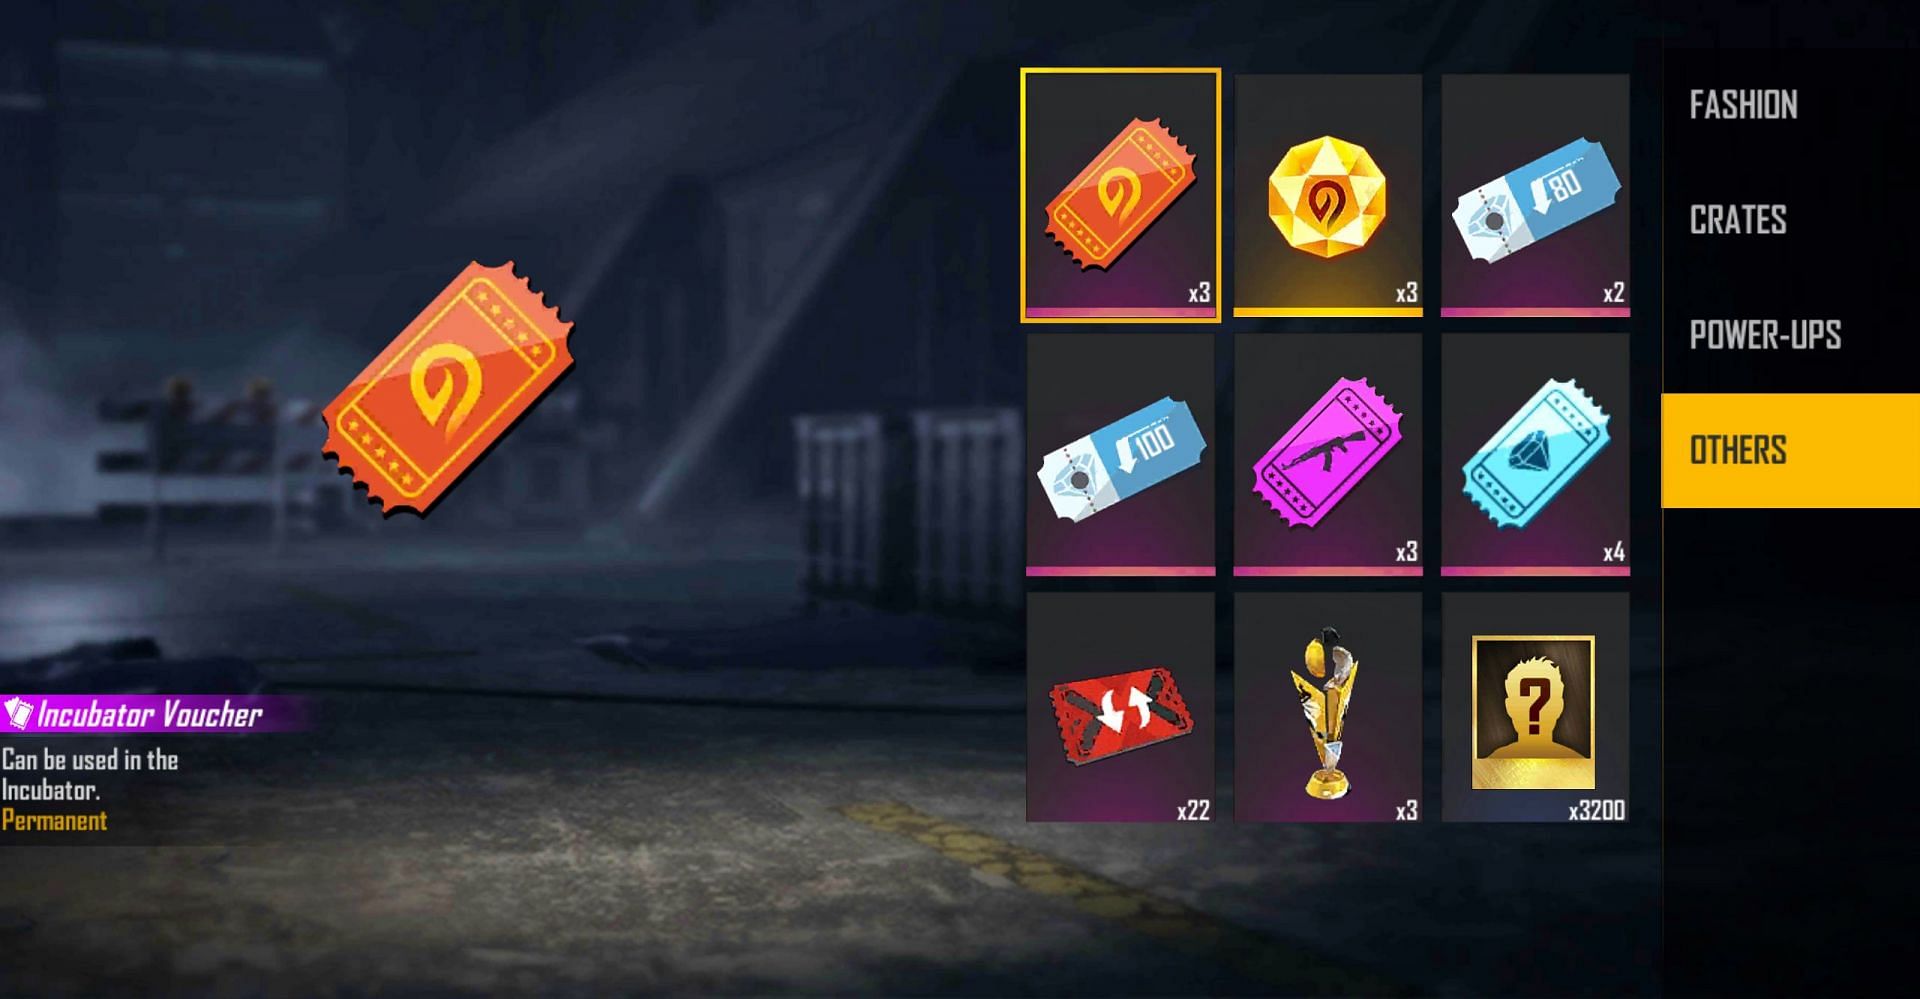 Incubator Voucher is also available for free (Image via Free Fire)